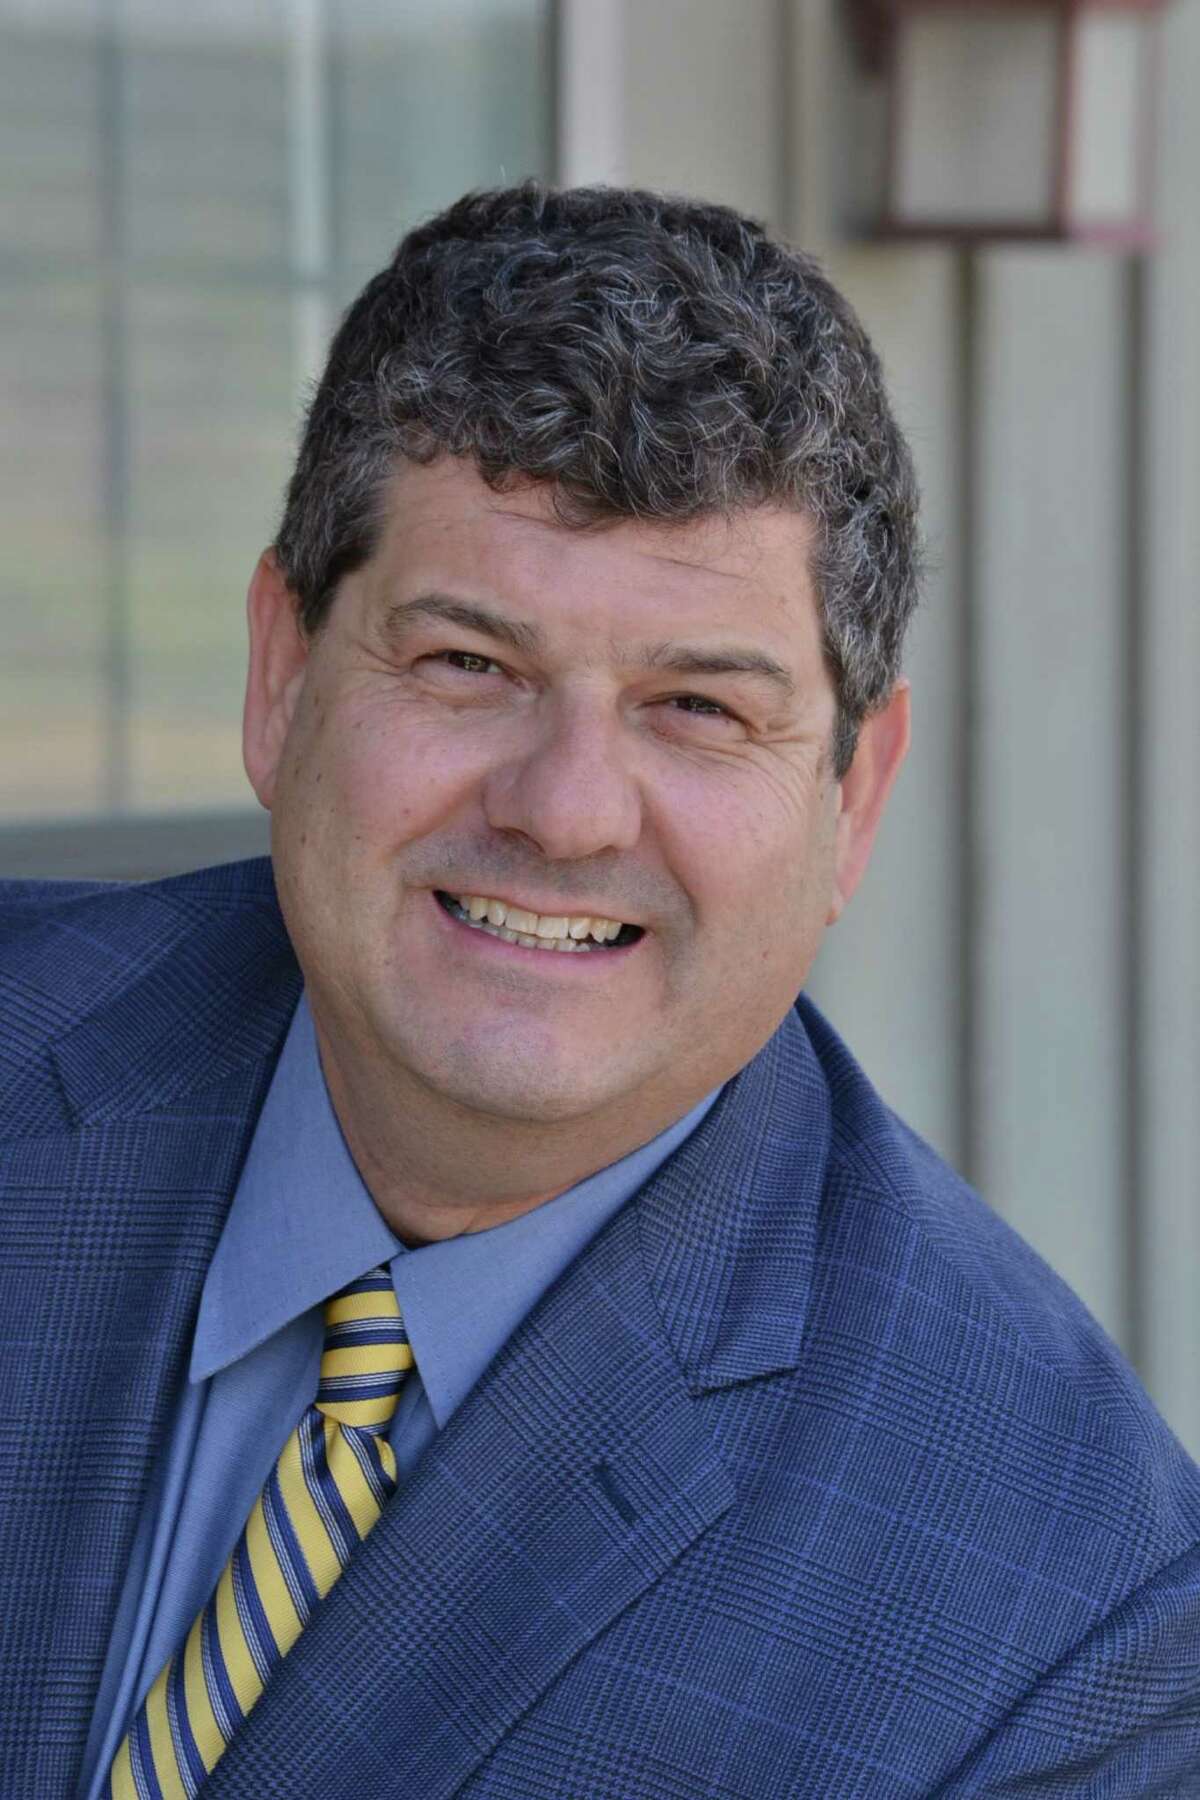 Robert J. Llorente is running for Position 1 on the Seabrook City Council in a June 16 runoff